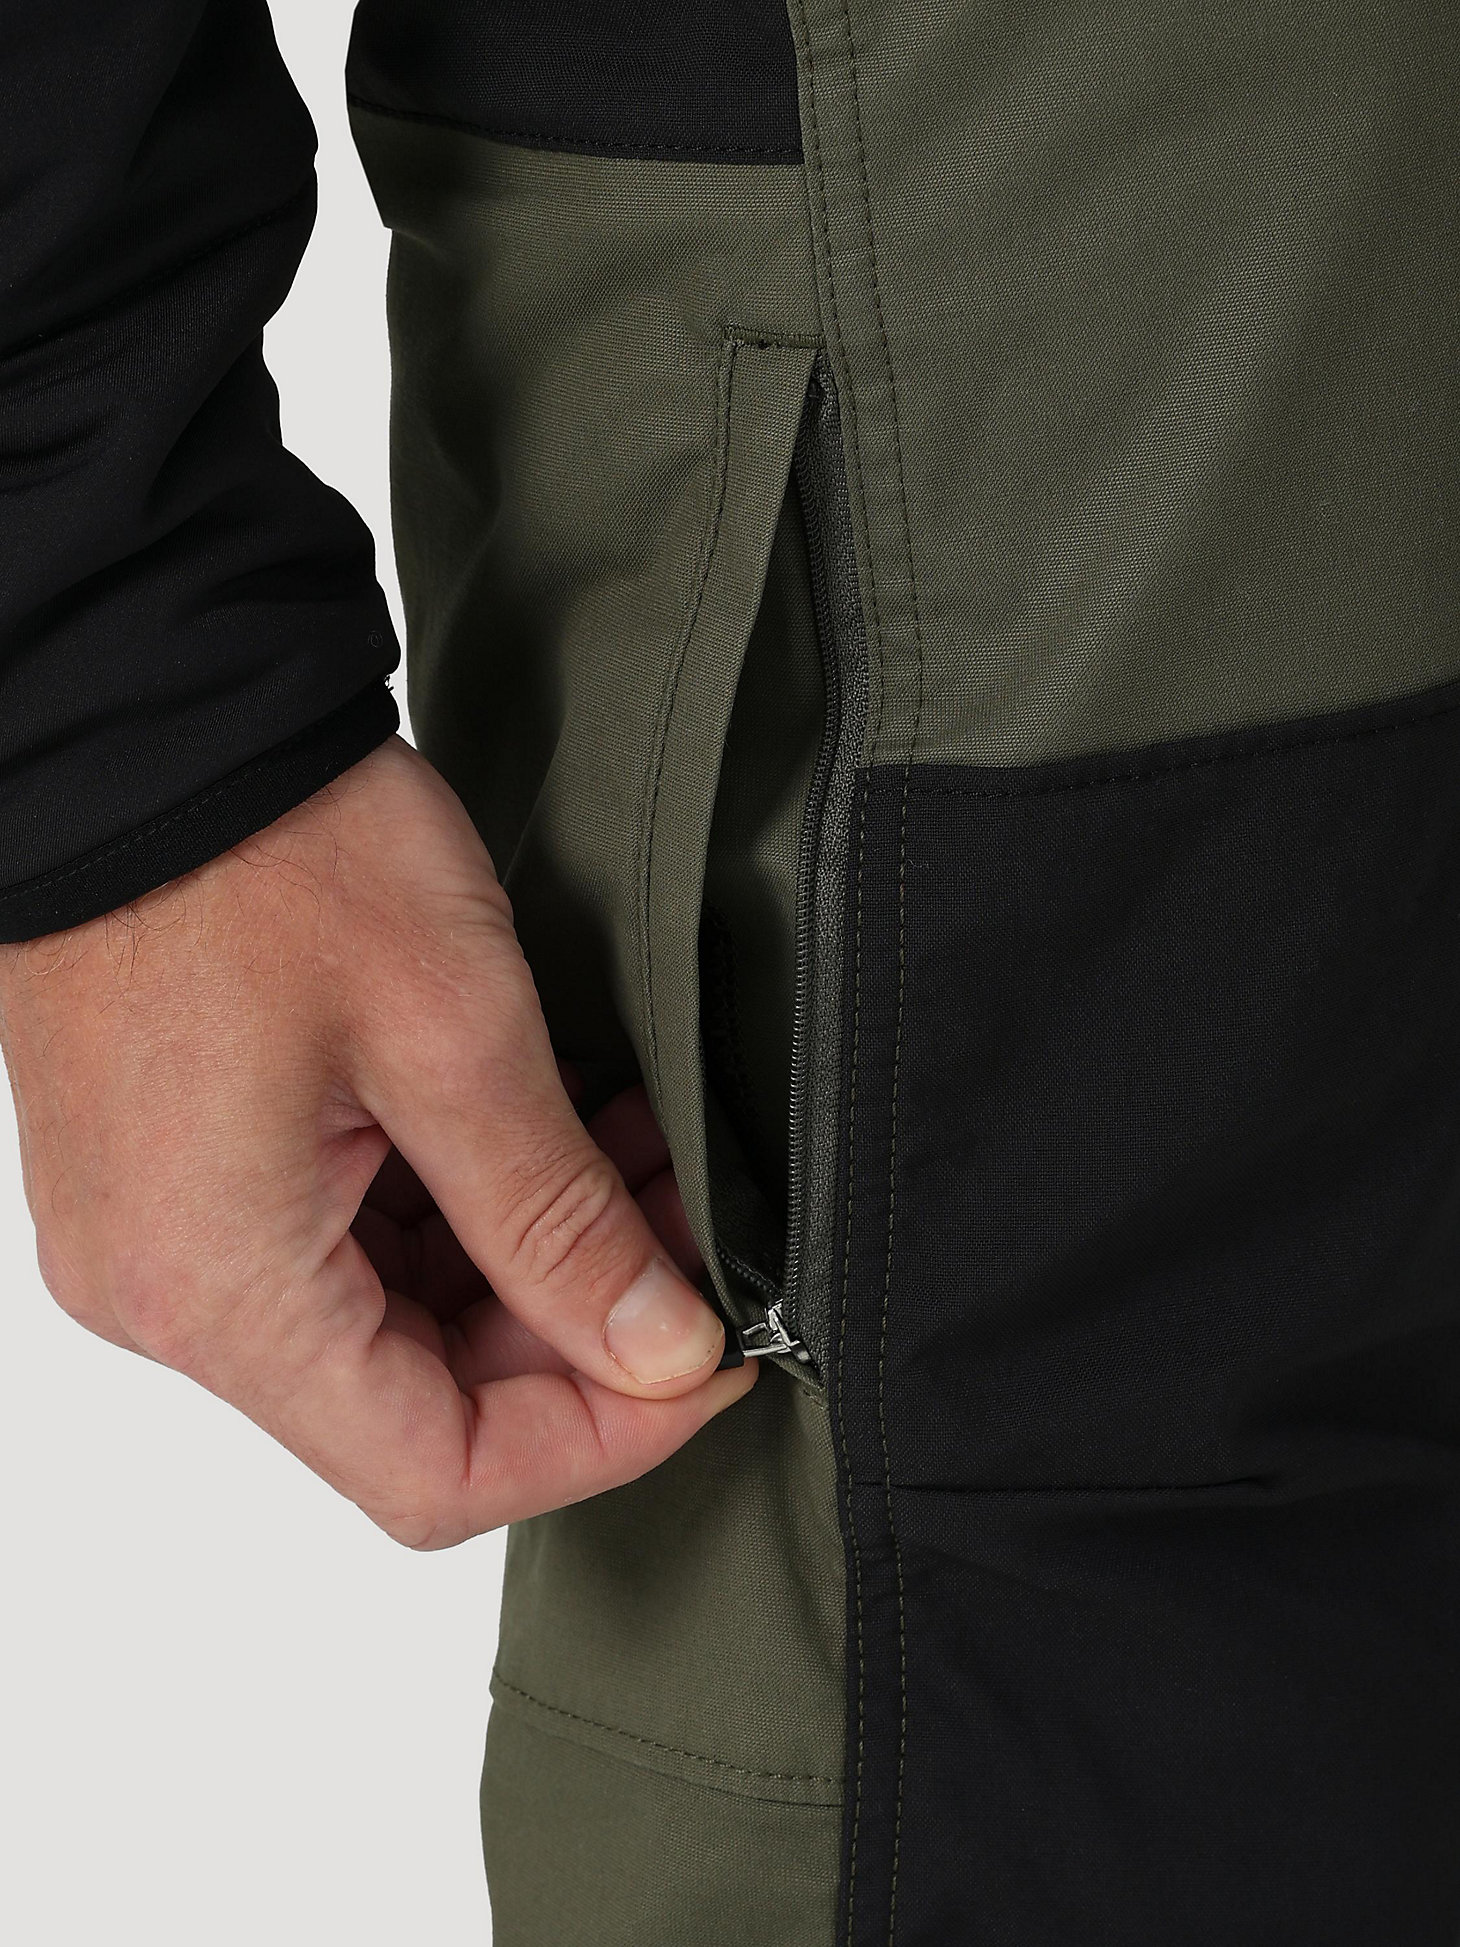 Reinforced Softshell Pant in Dusty Olive alternative view 4